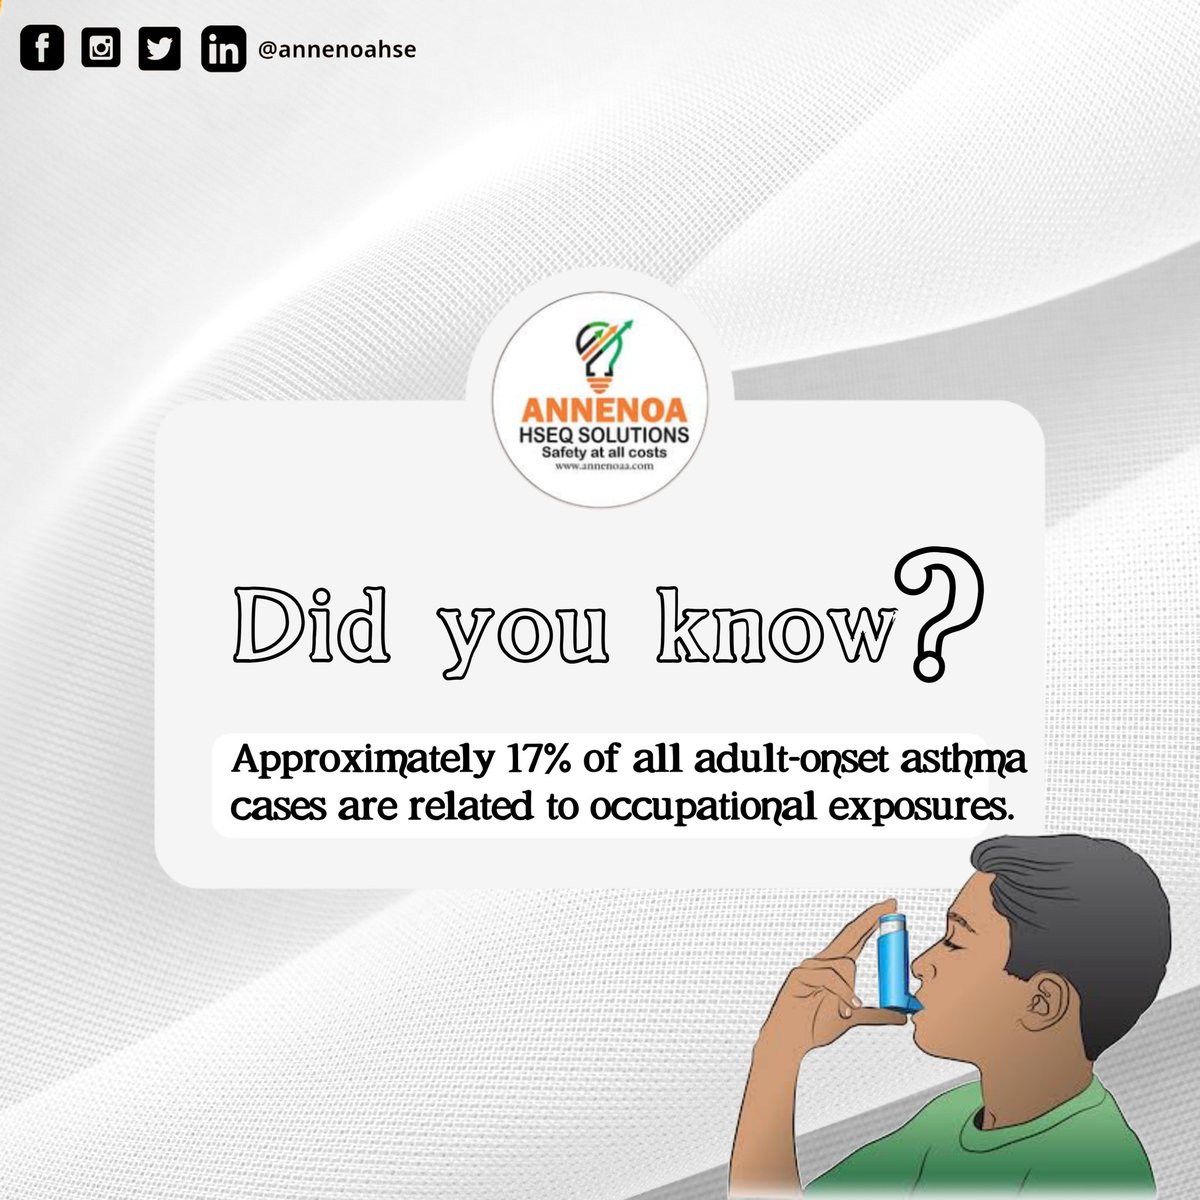 Did you know? 
Occupational asthma is one of the two types of work related asthma. And it is caused by inhaling in substances at work, like dust, chemicals, fumes and animal fur. #Annenoahseq #WorldAsthmaDay2021
#OccupationalAsthma #AsthmaPrevention #Awarenessonasthma
#AsthmaMgt